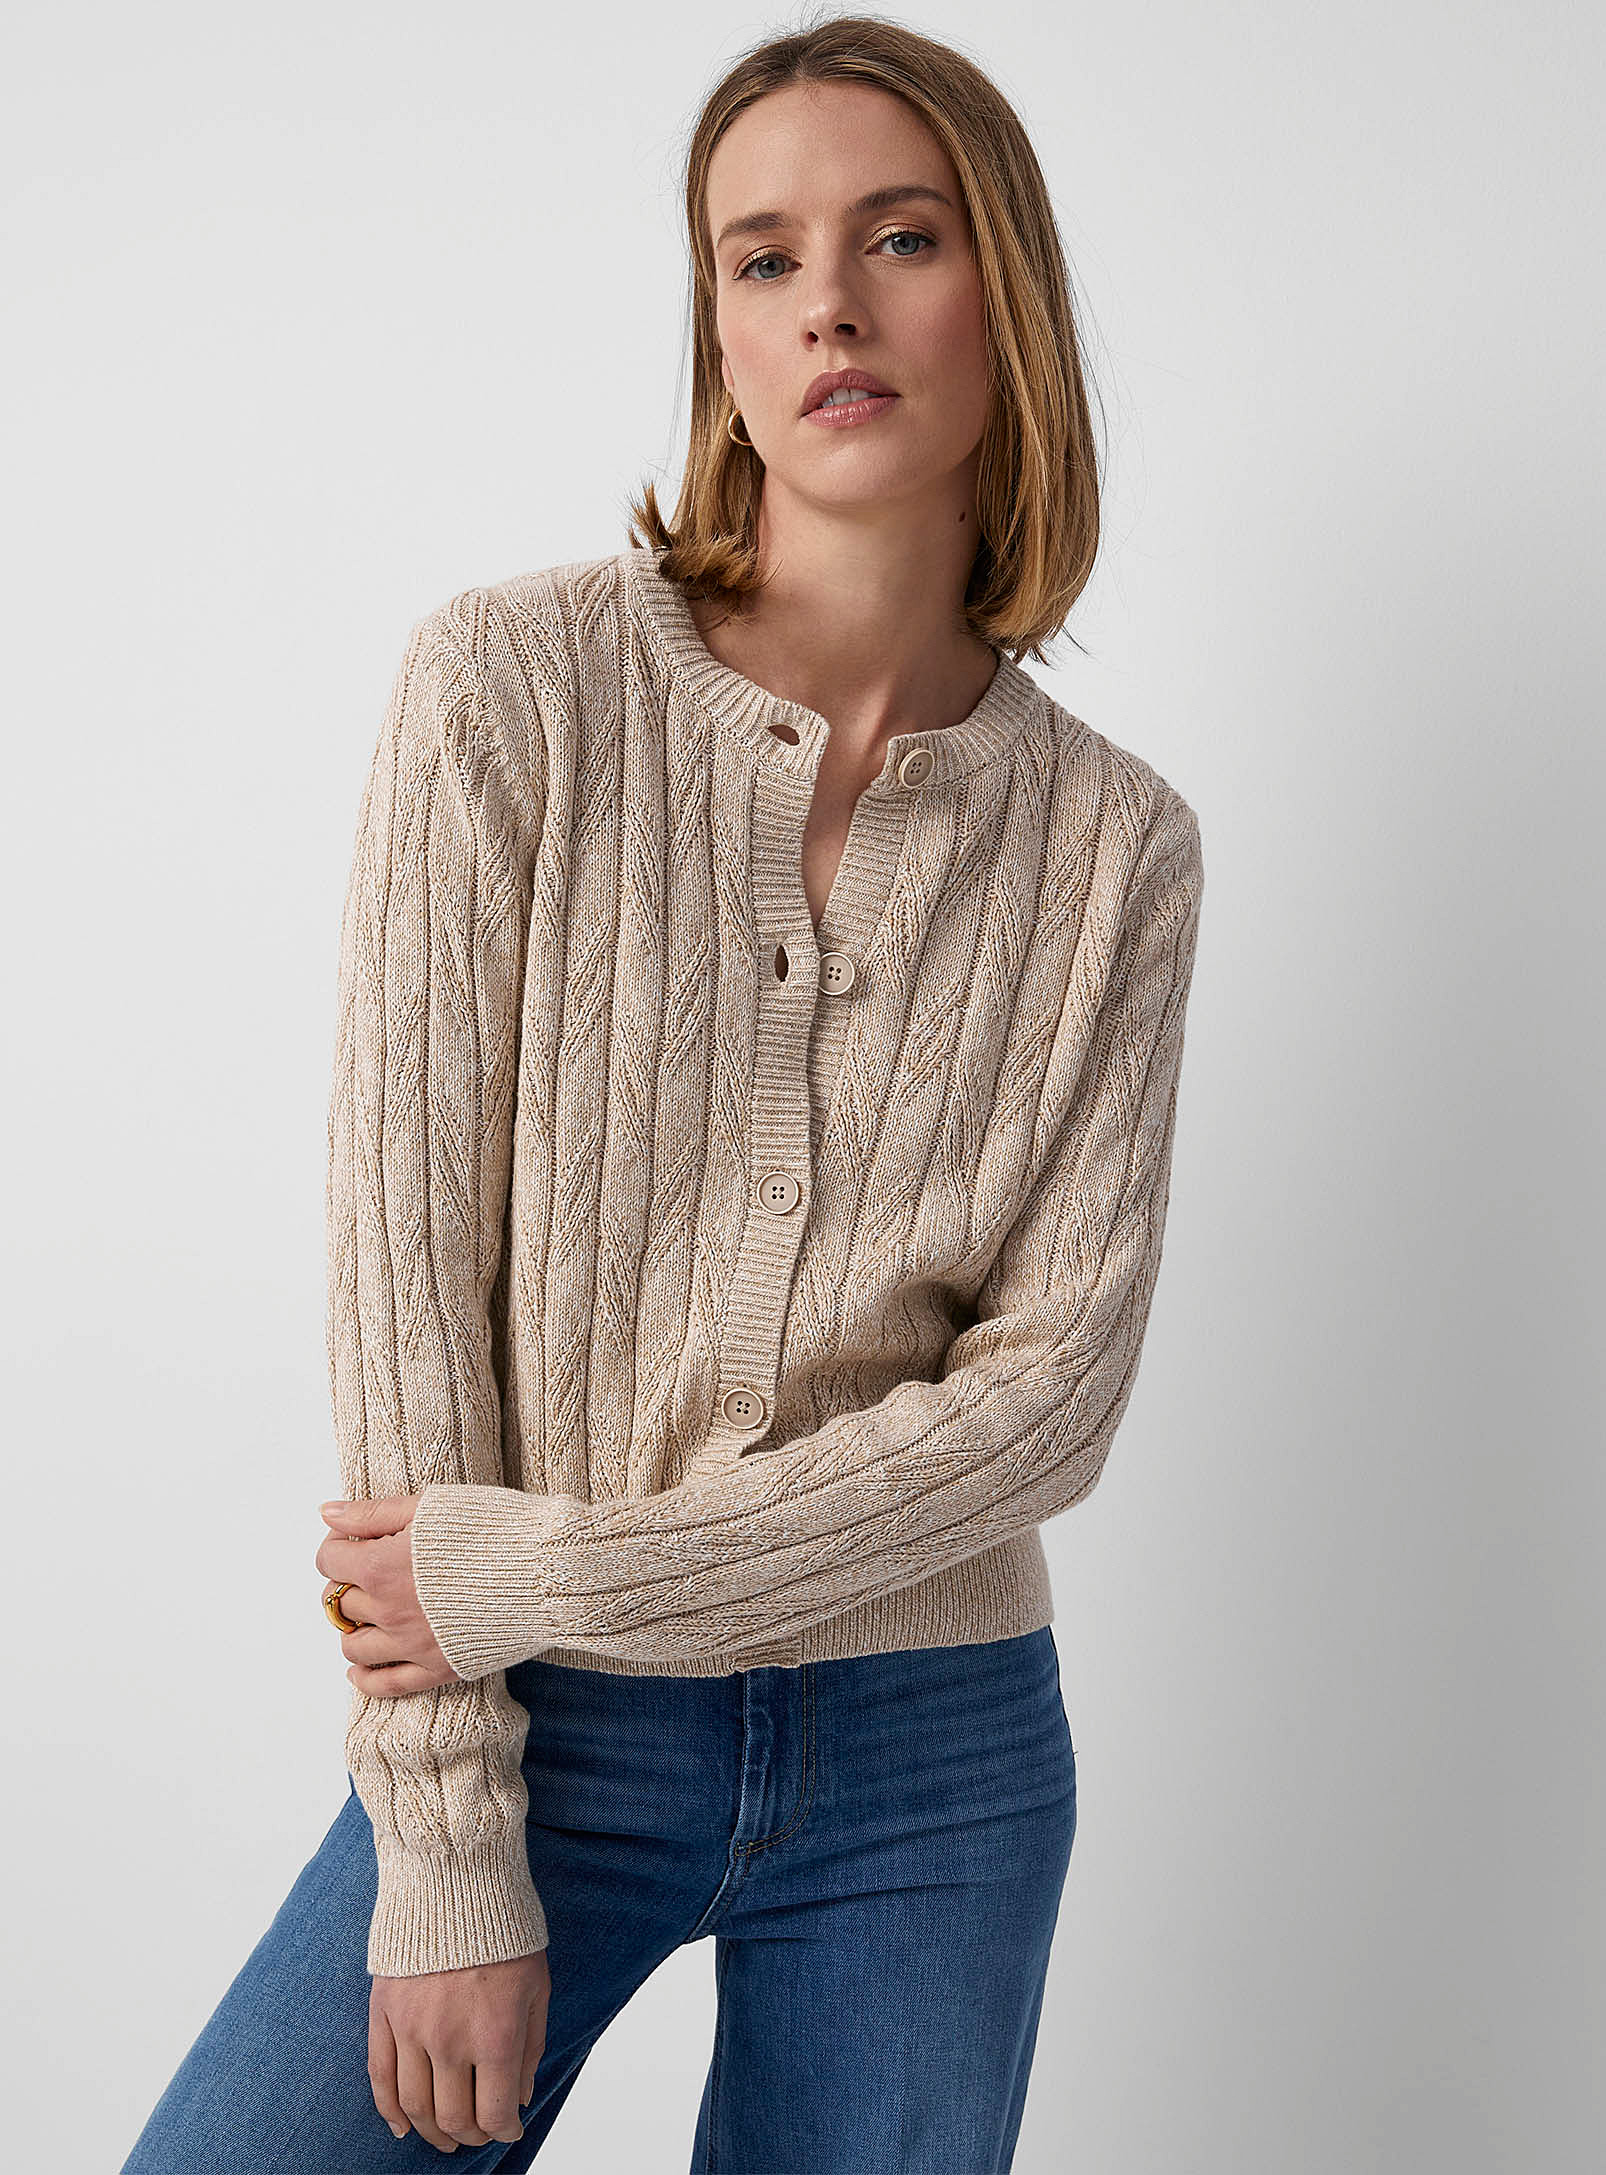 Contemporaine - Women's Twisted cable-knit heathered Cardigan Sweater